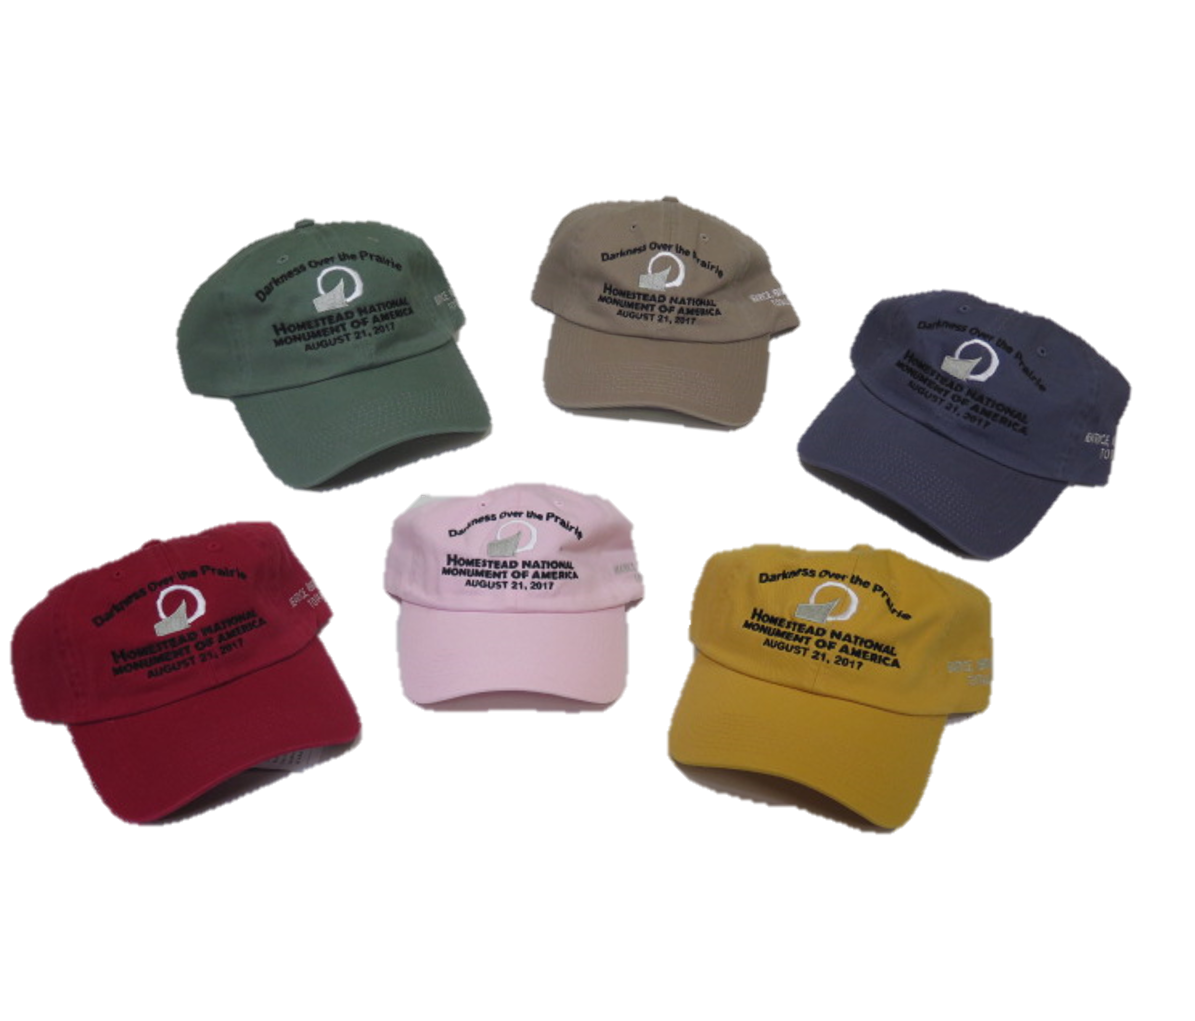 6 Hat colors shown with Darkness Over the Prairie logo